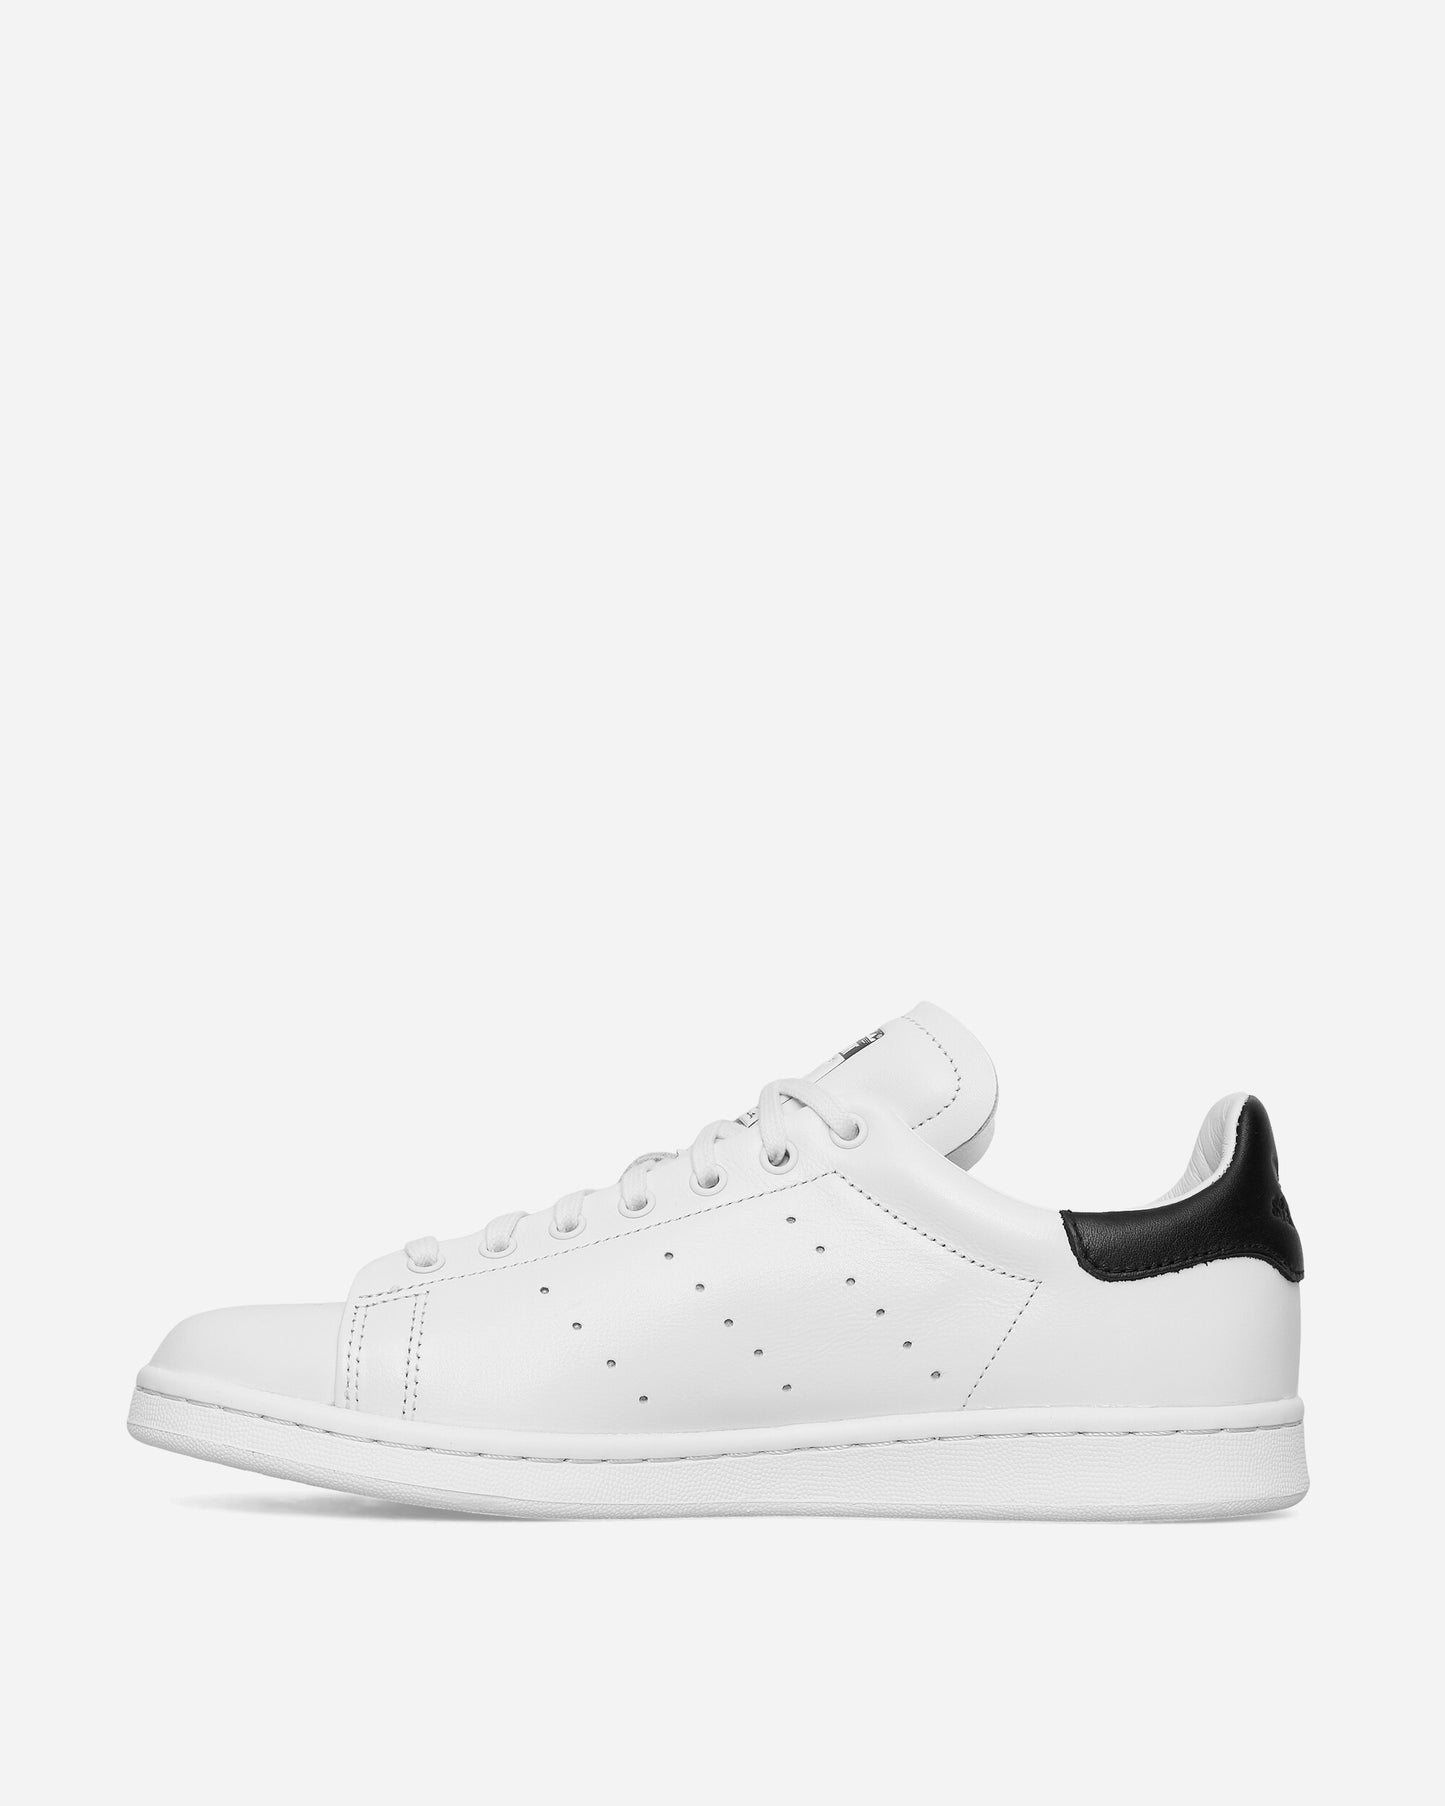 adidas Stan Smith Lux White Sneakers Low HQ6785 001